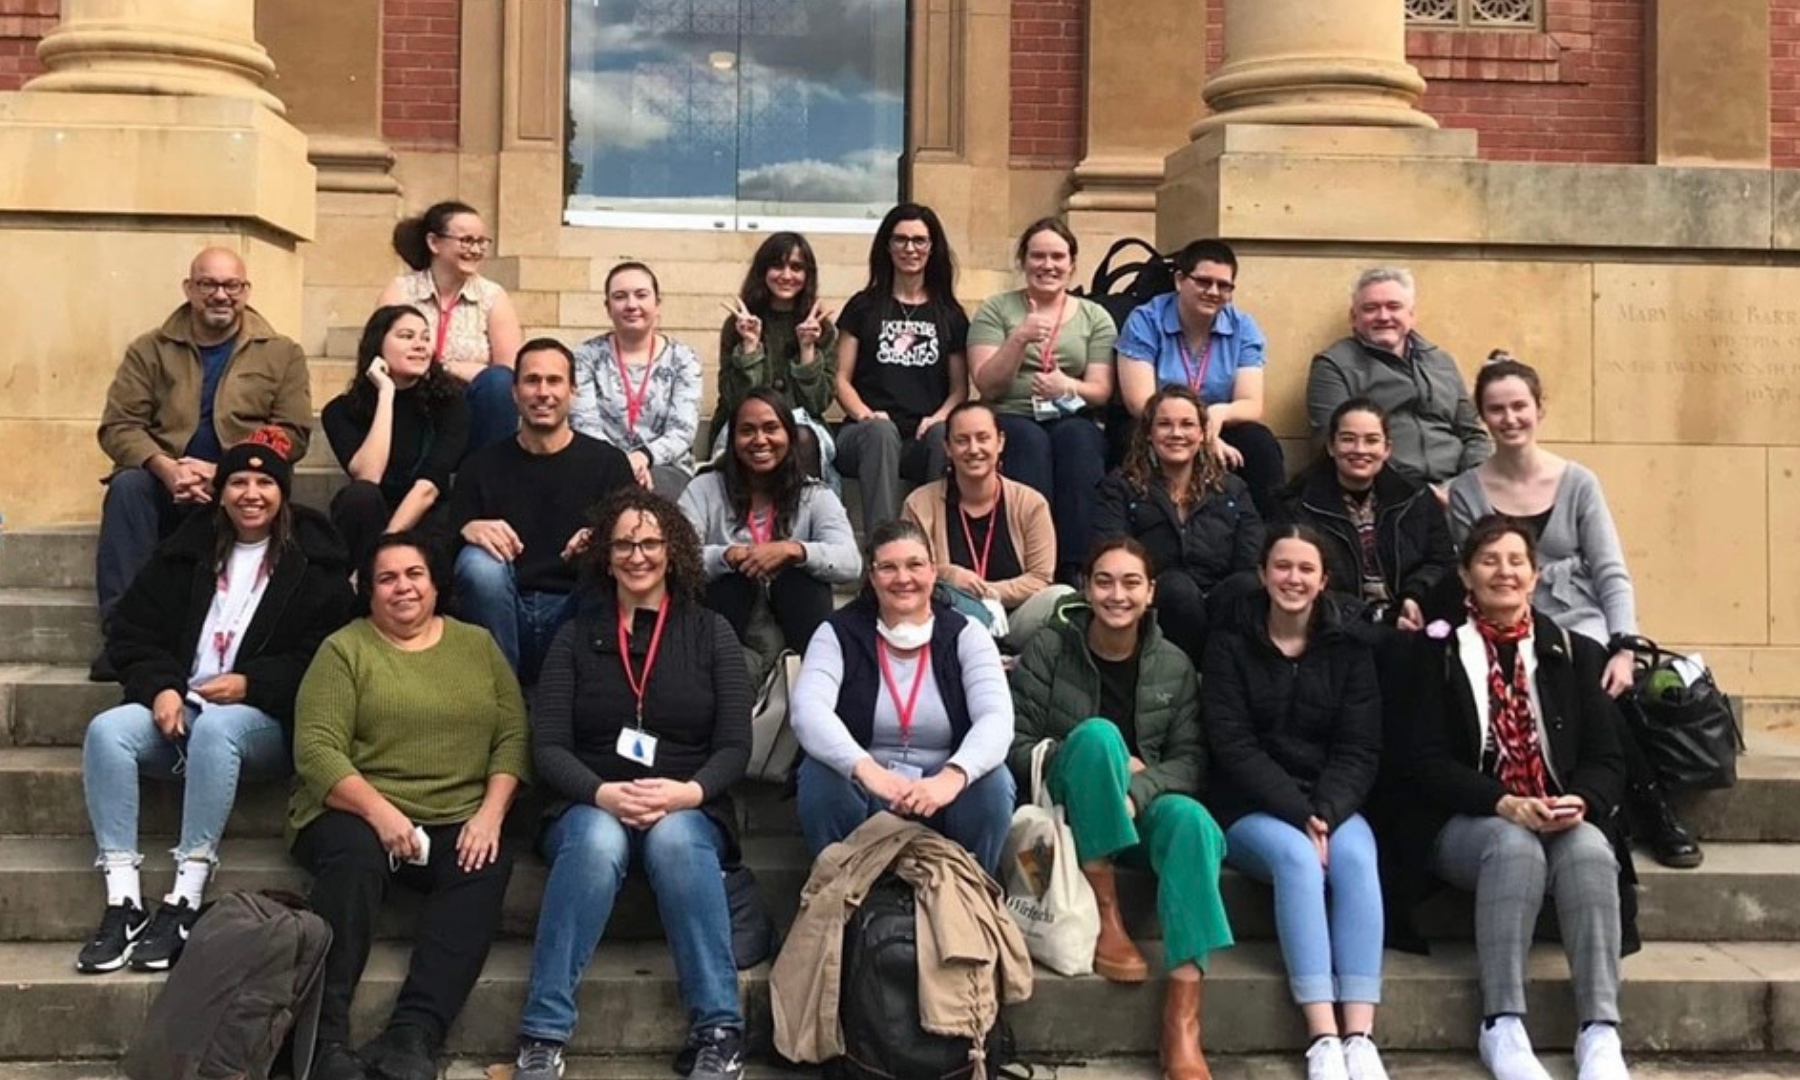 Group photo of participants of SING Australia workshop sitting on the steps of a building